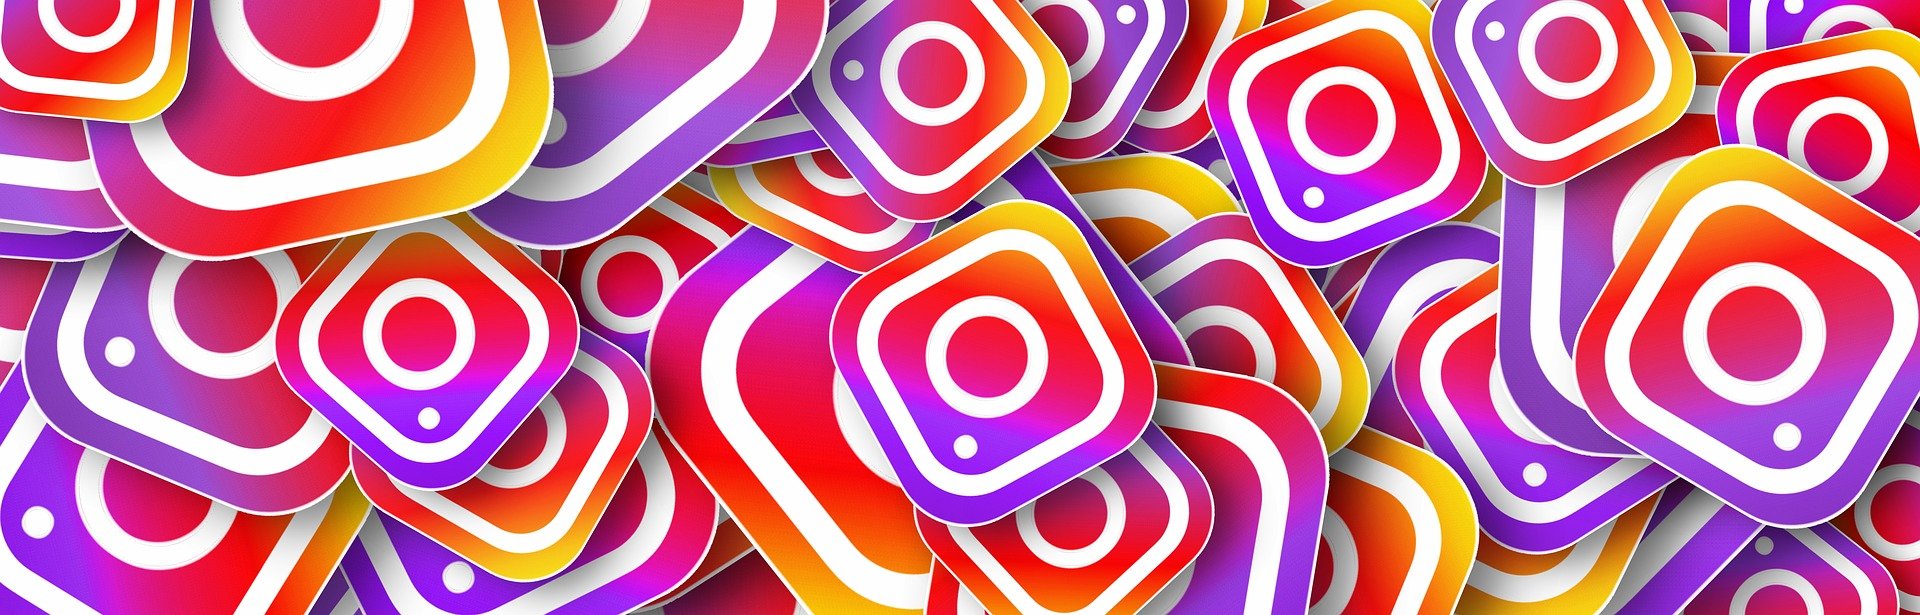 Instagram suffers a crash and suspends accounts without notice